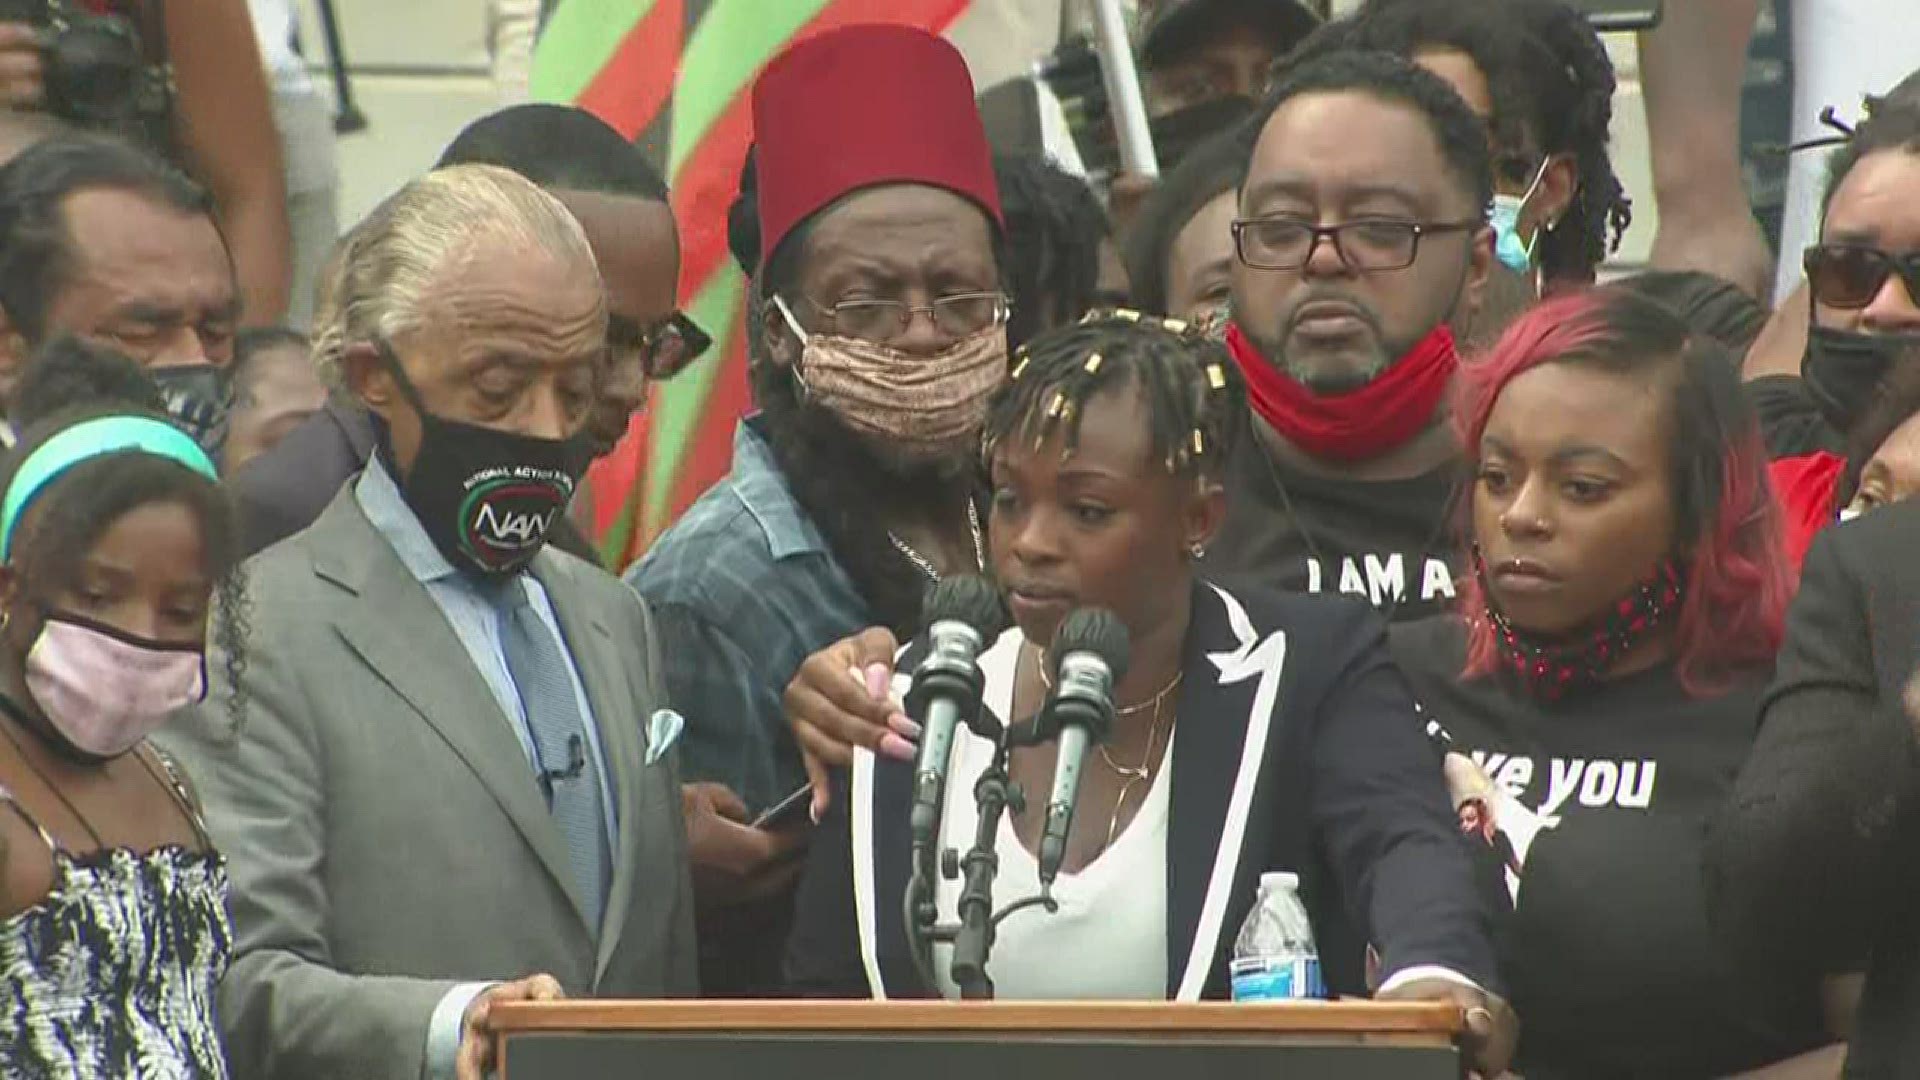 Letetra Widman, sister of Jacob Blake gave a powerful speech at the March on Washington after her brother was shot multiple times by police in Wisconsin.